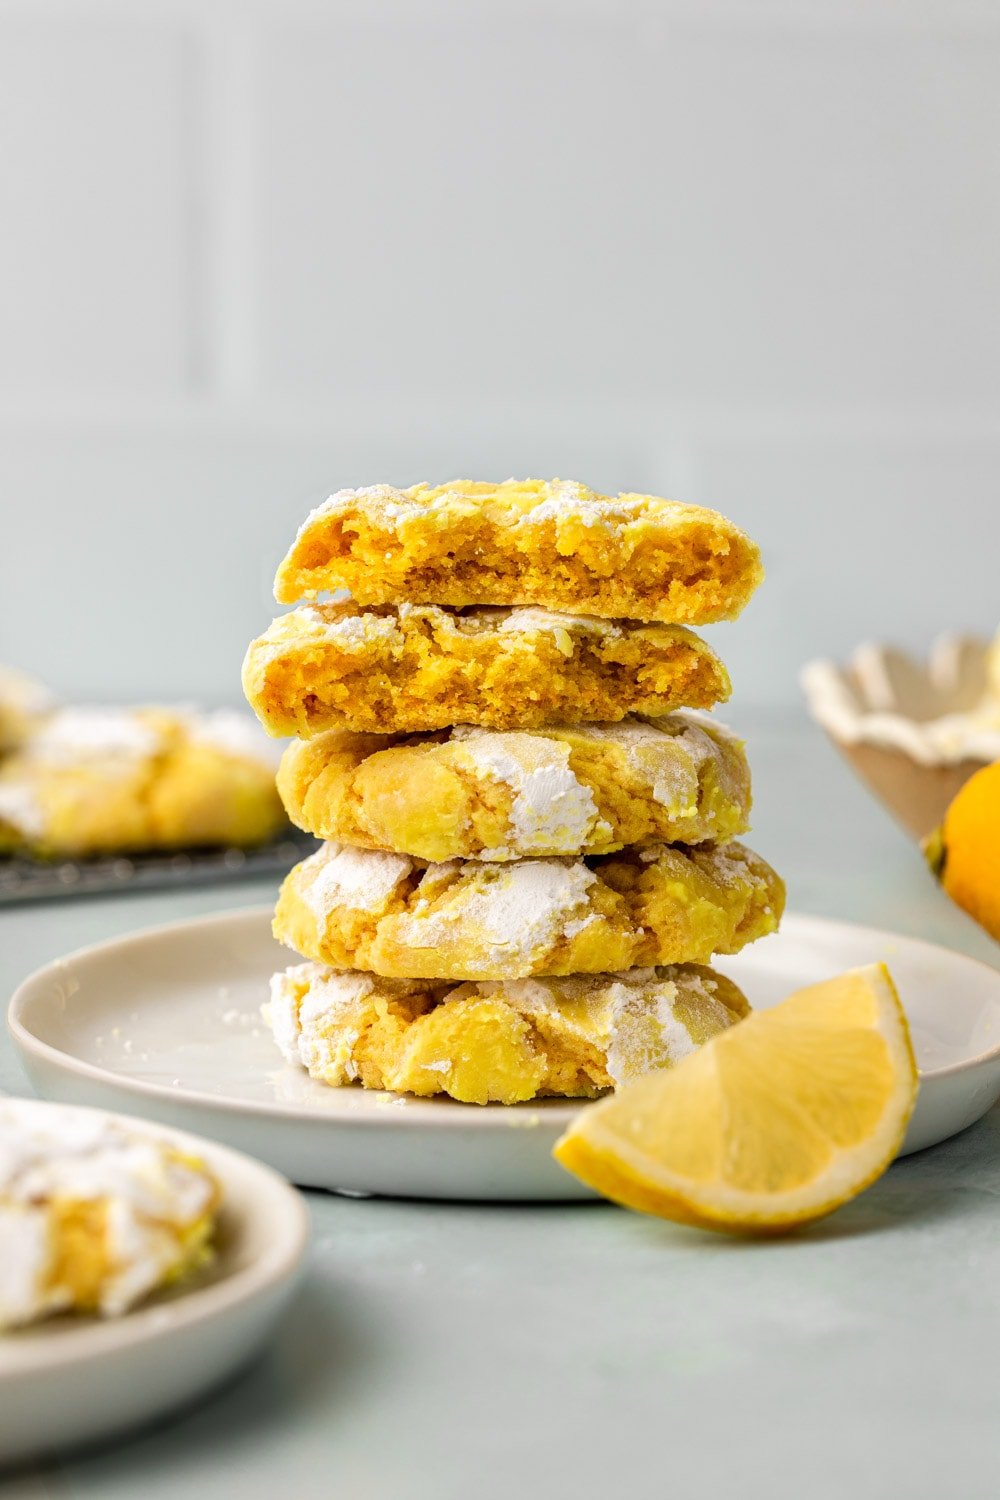 four lemon crinkle cookies stacked on top of each other on a white plate with a slice of lemon placed next to the plate, in a white backdrop